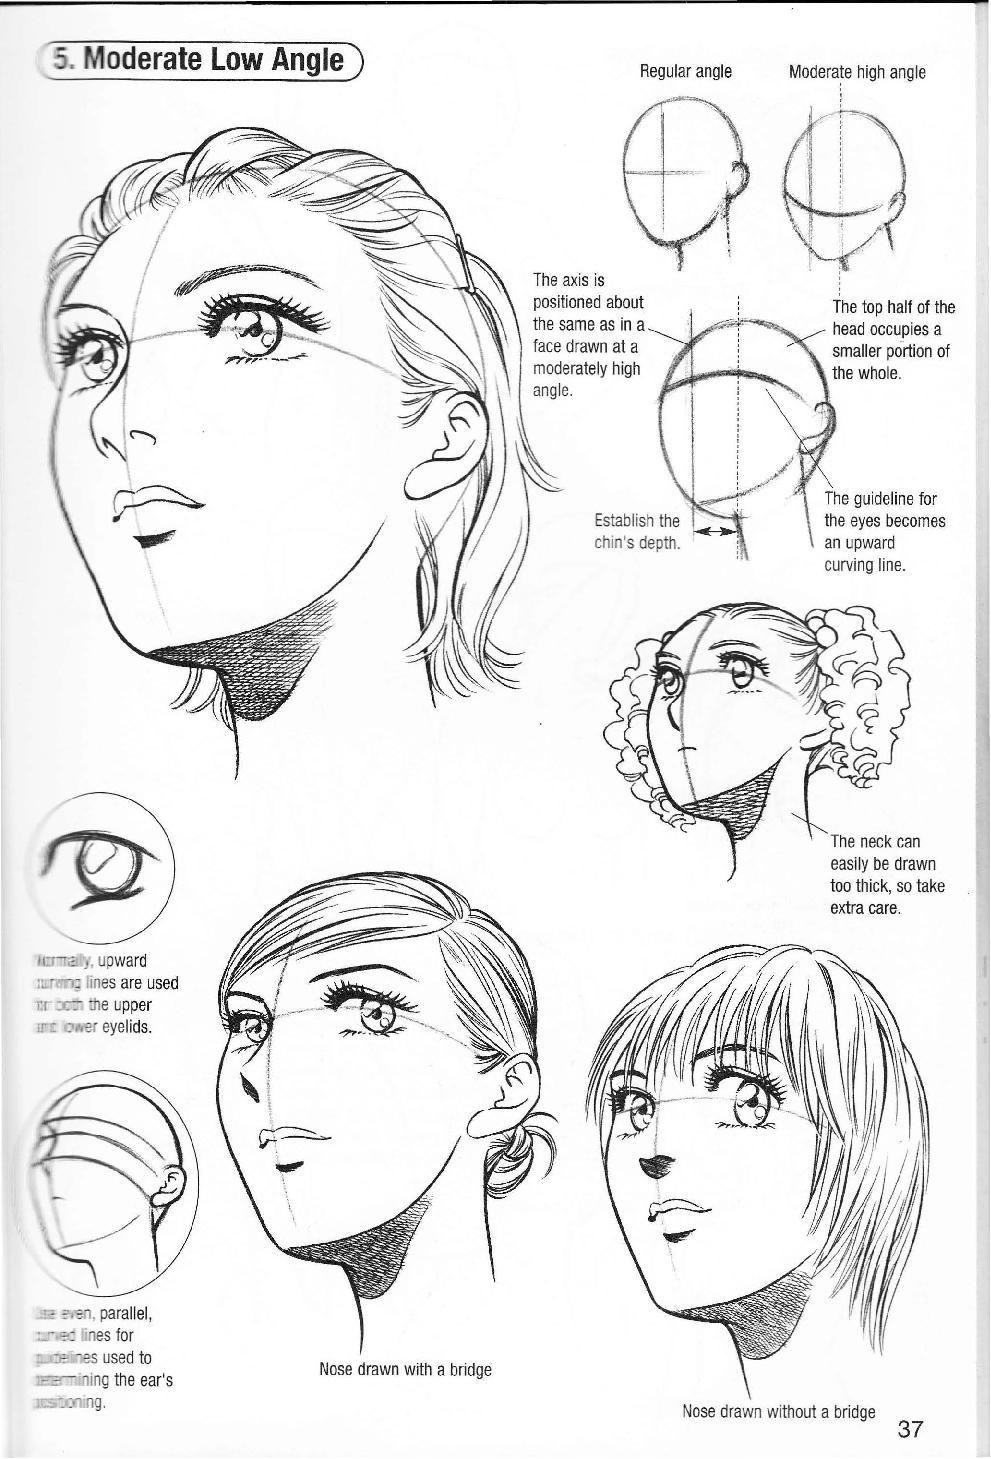 More How to Draw Manga Vol. 2 - Penning Characters 38